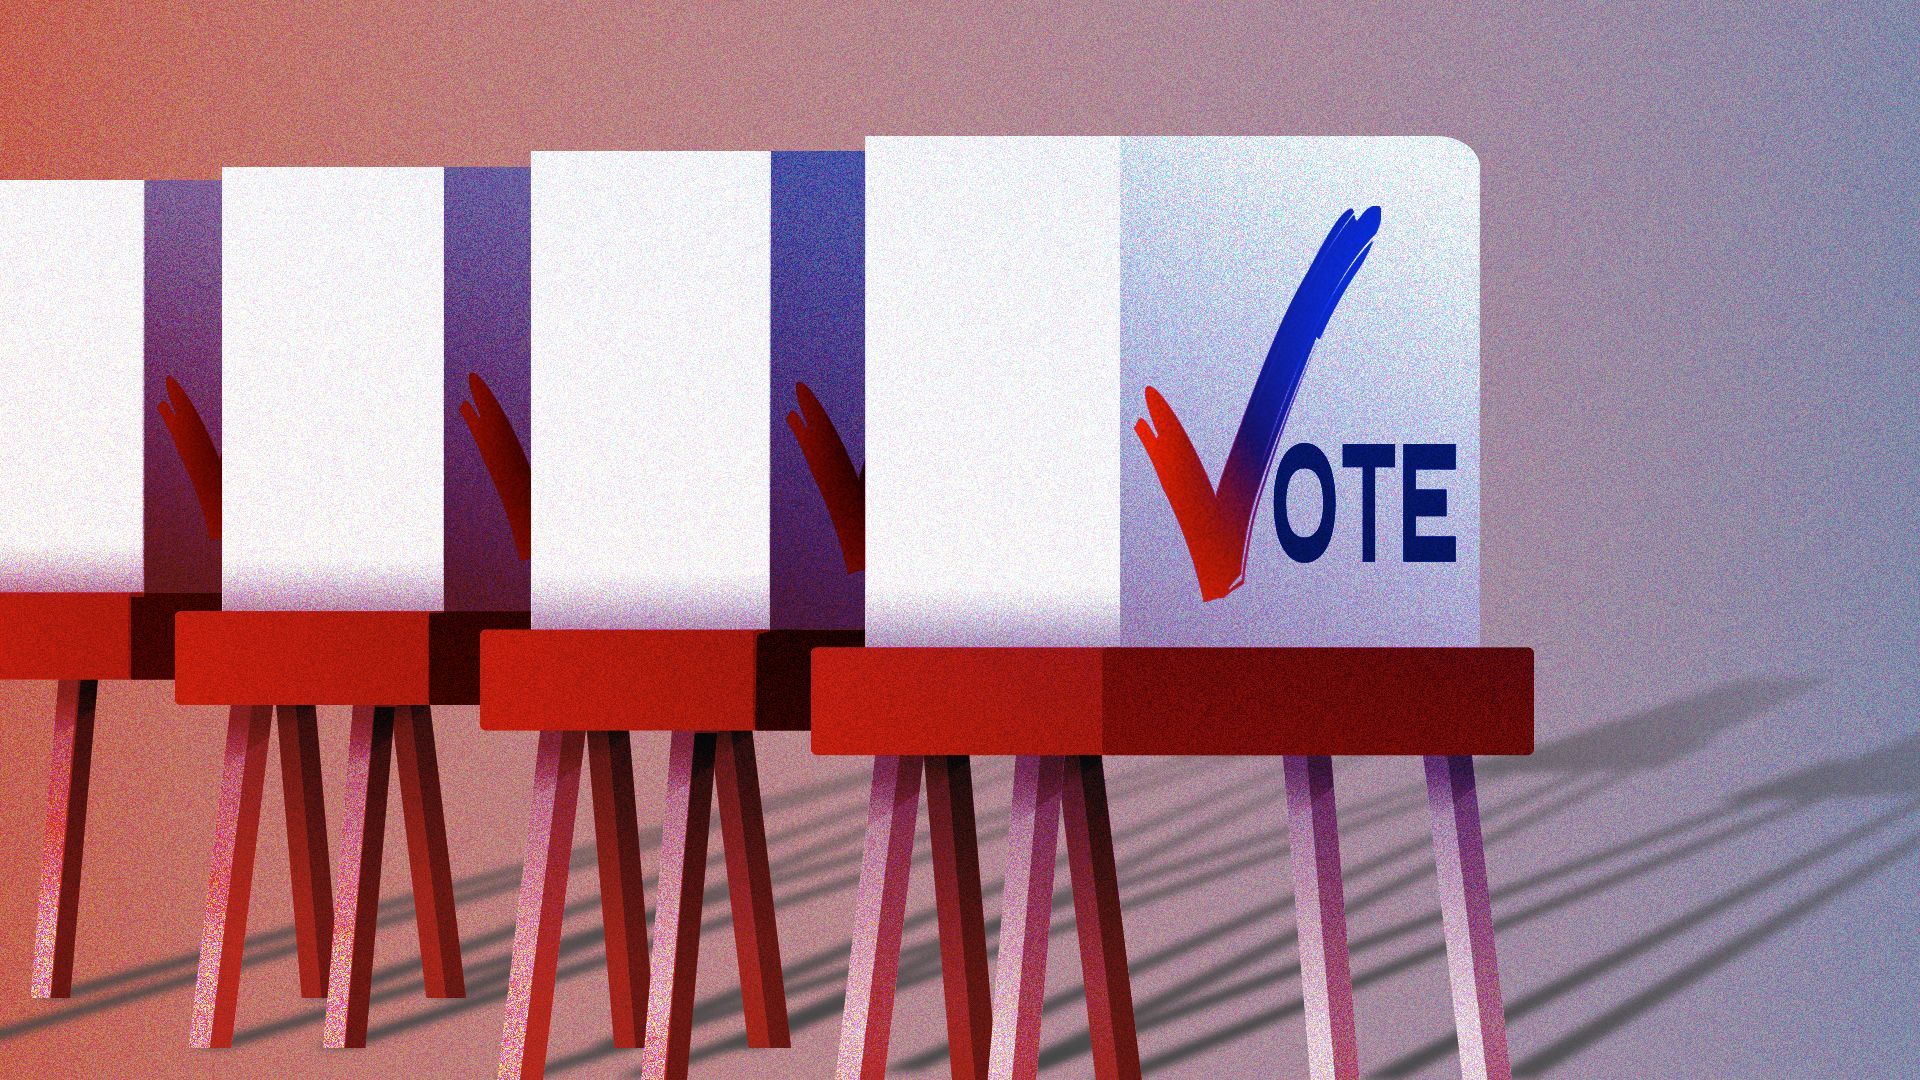 Illustration of a row of voting booths casting long shadows, the side of the booth reads "VOTE" with a checkmark as the V.